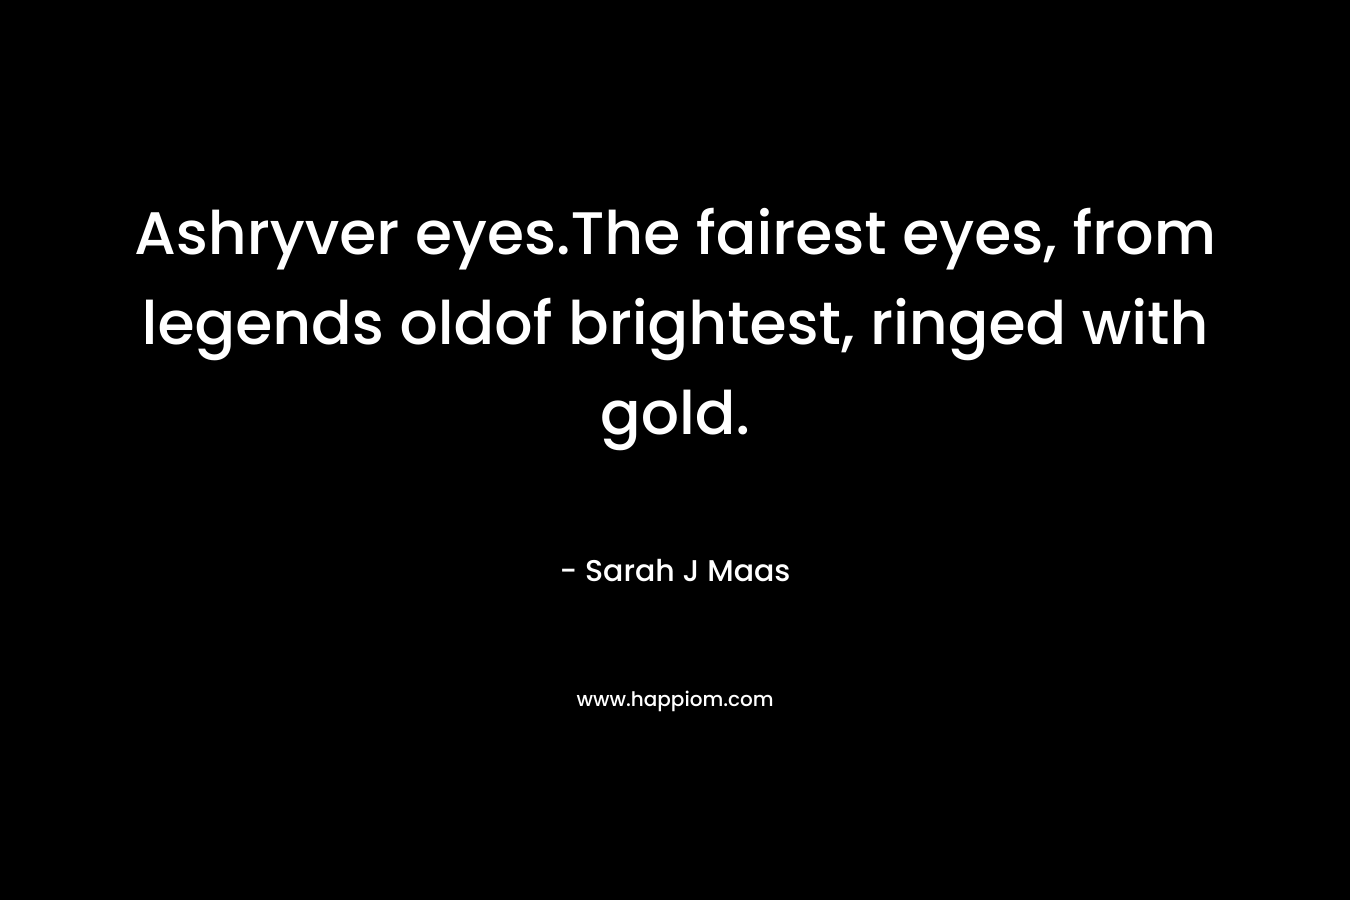 Ashryver eyes.The fairest eyes, from legends oldof brightest, ringed with gold.